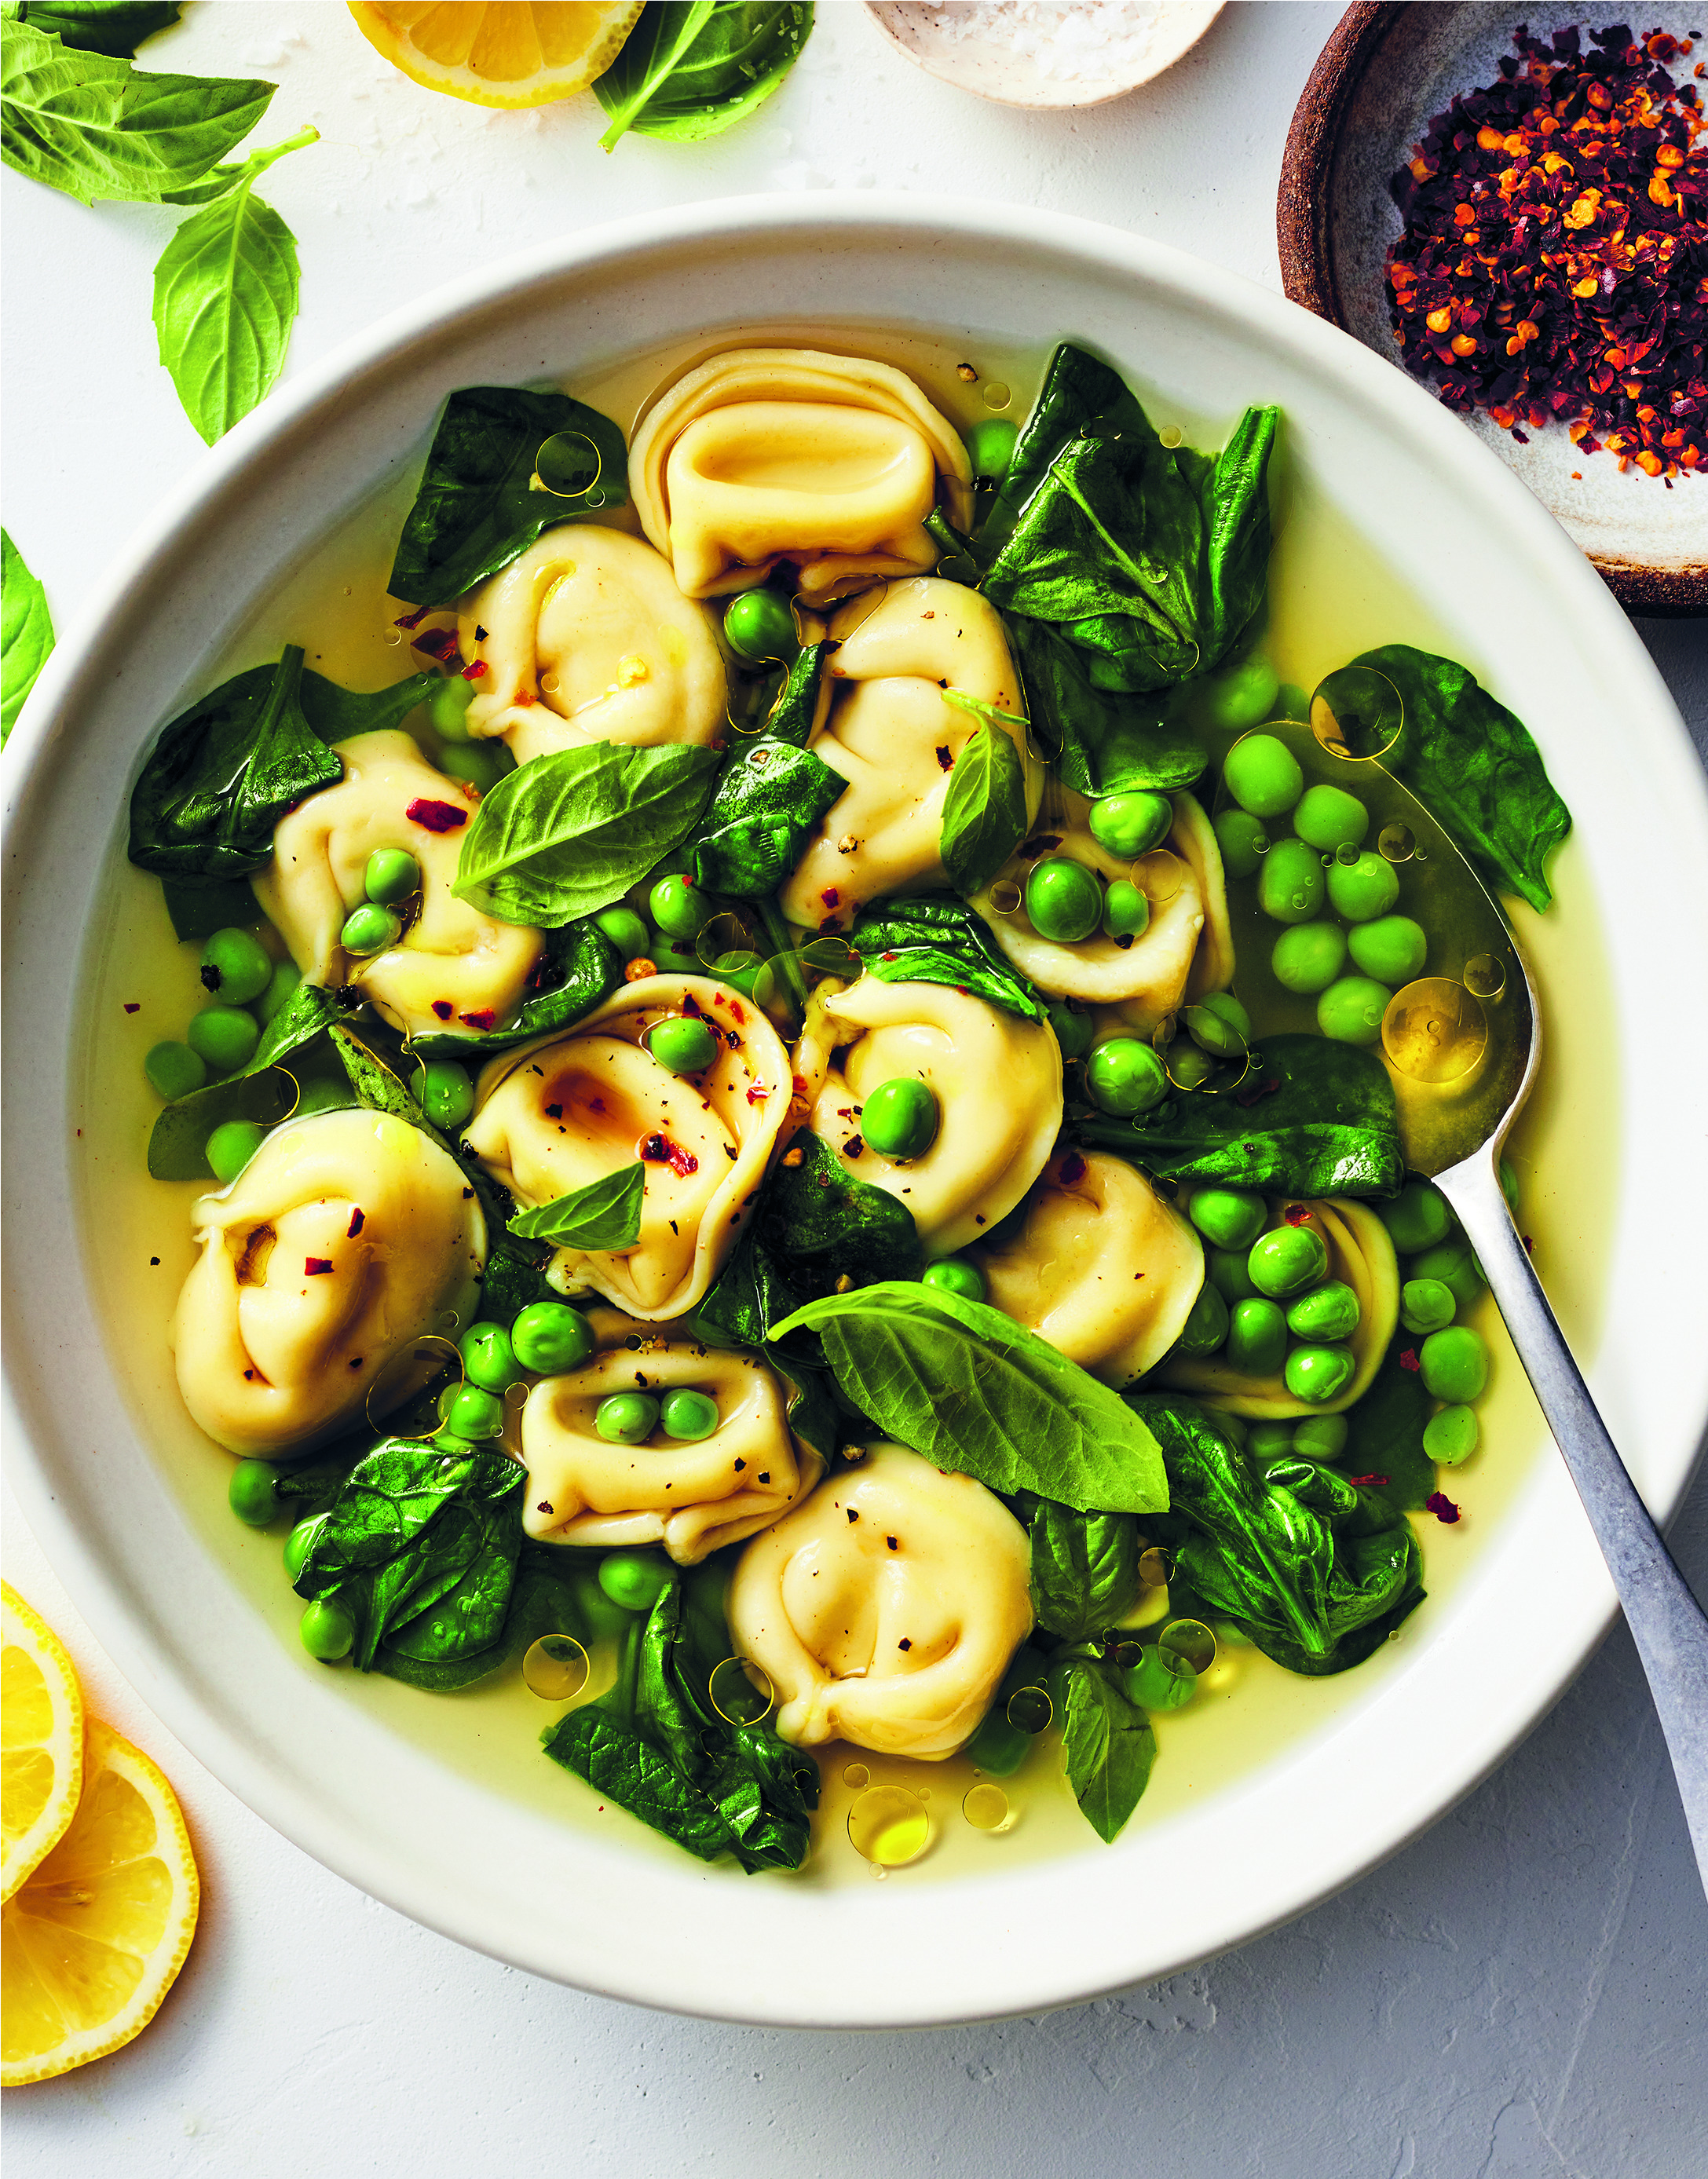 Lemony Tortellini Soup With Spinach and Dill Recipe